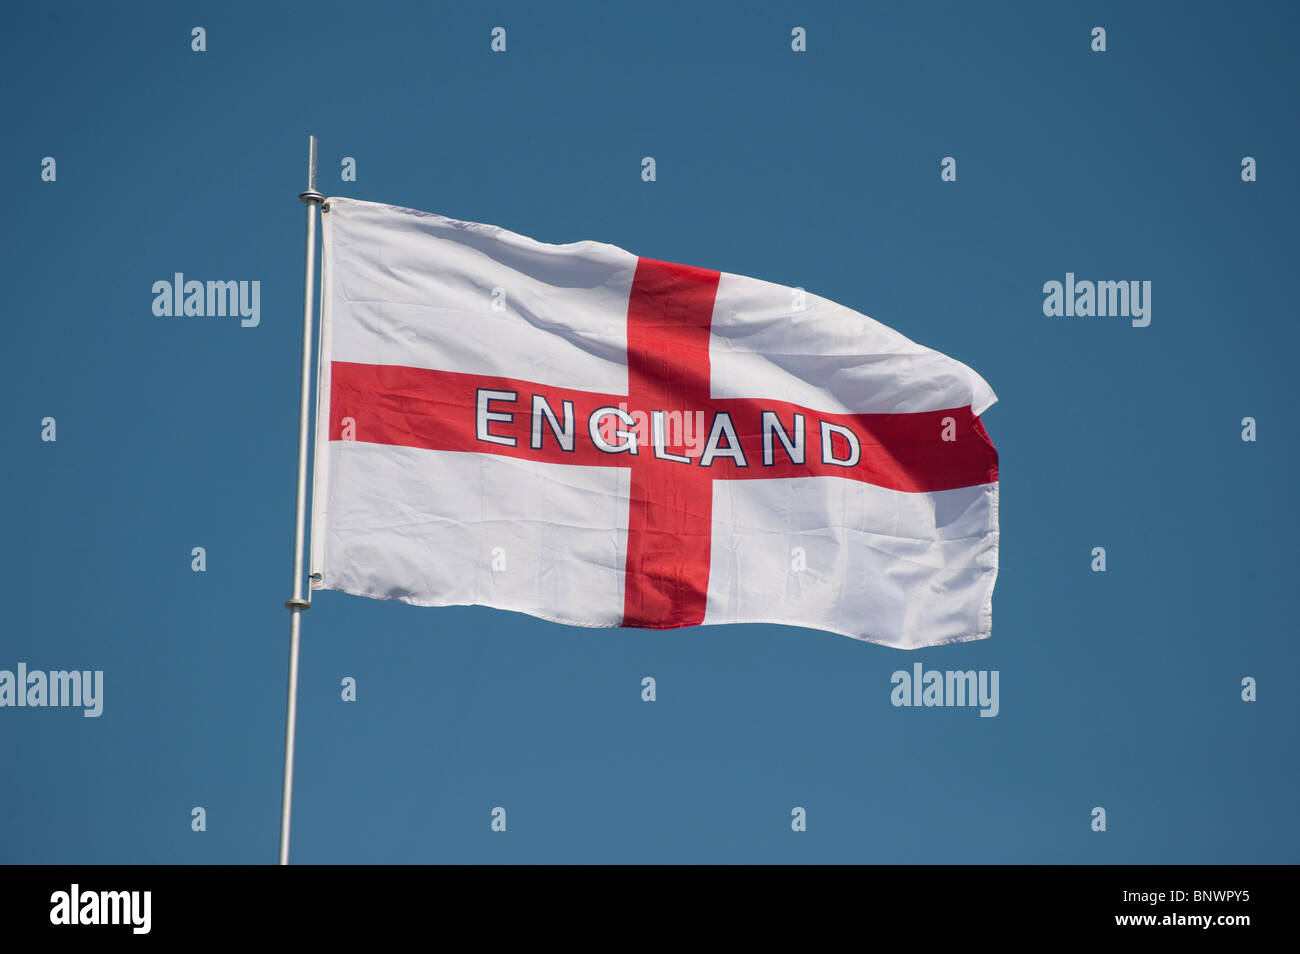 England flag flying in a bright blue sky. Stock Photo